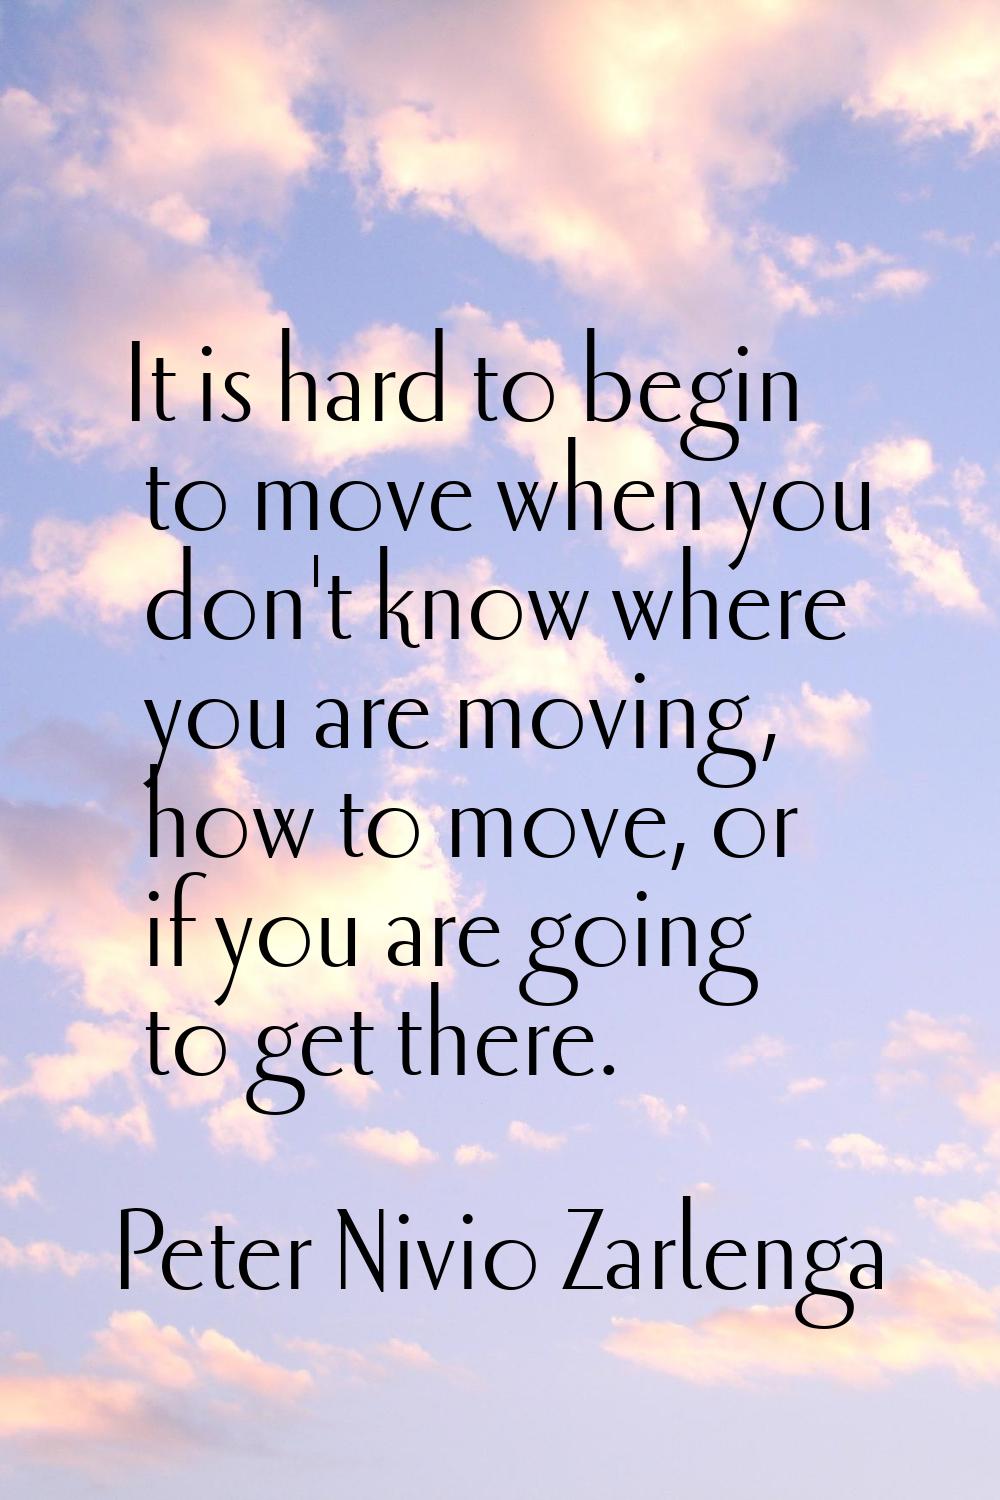 It is hard to begin to move when you don't know where you are moving, how to move, or if you are go